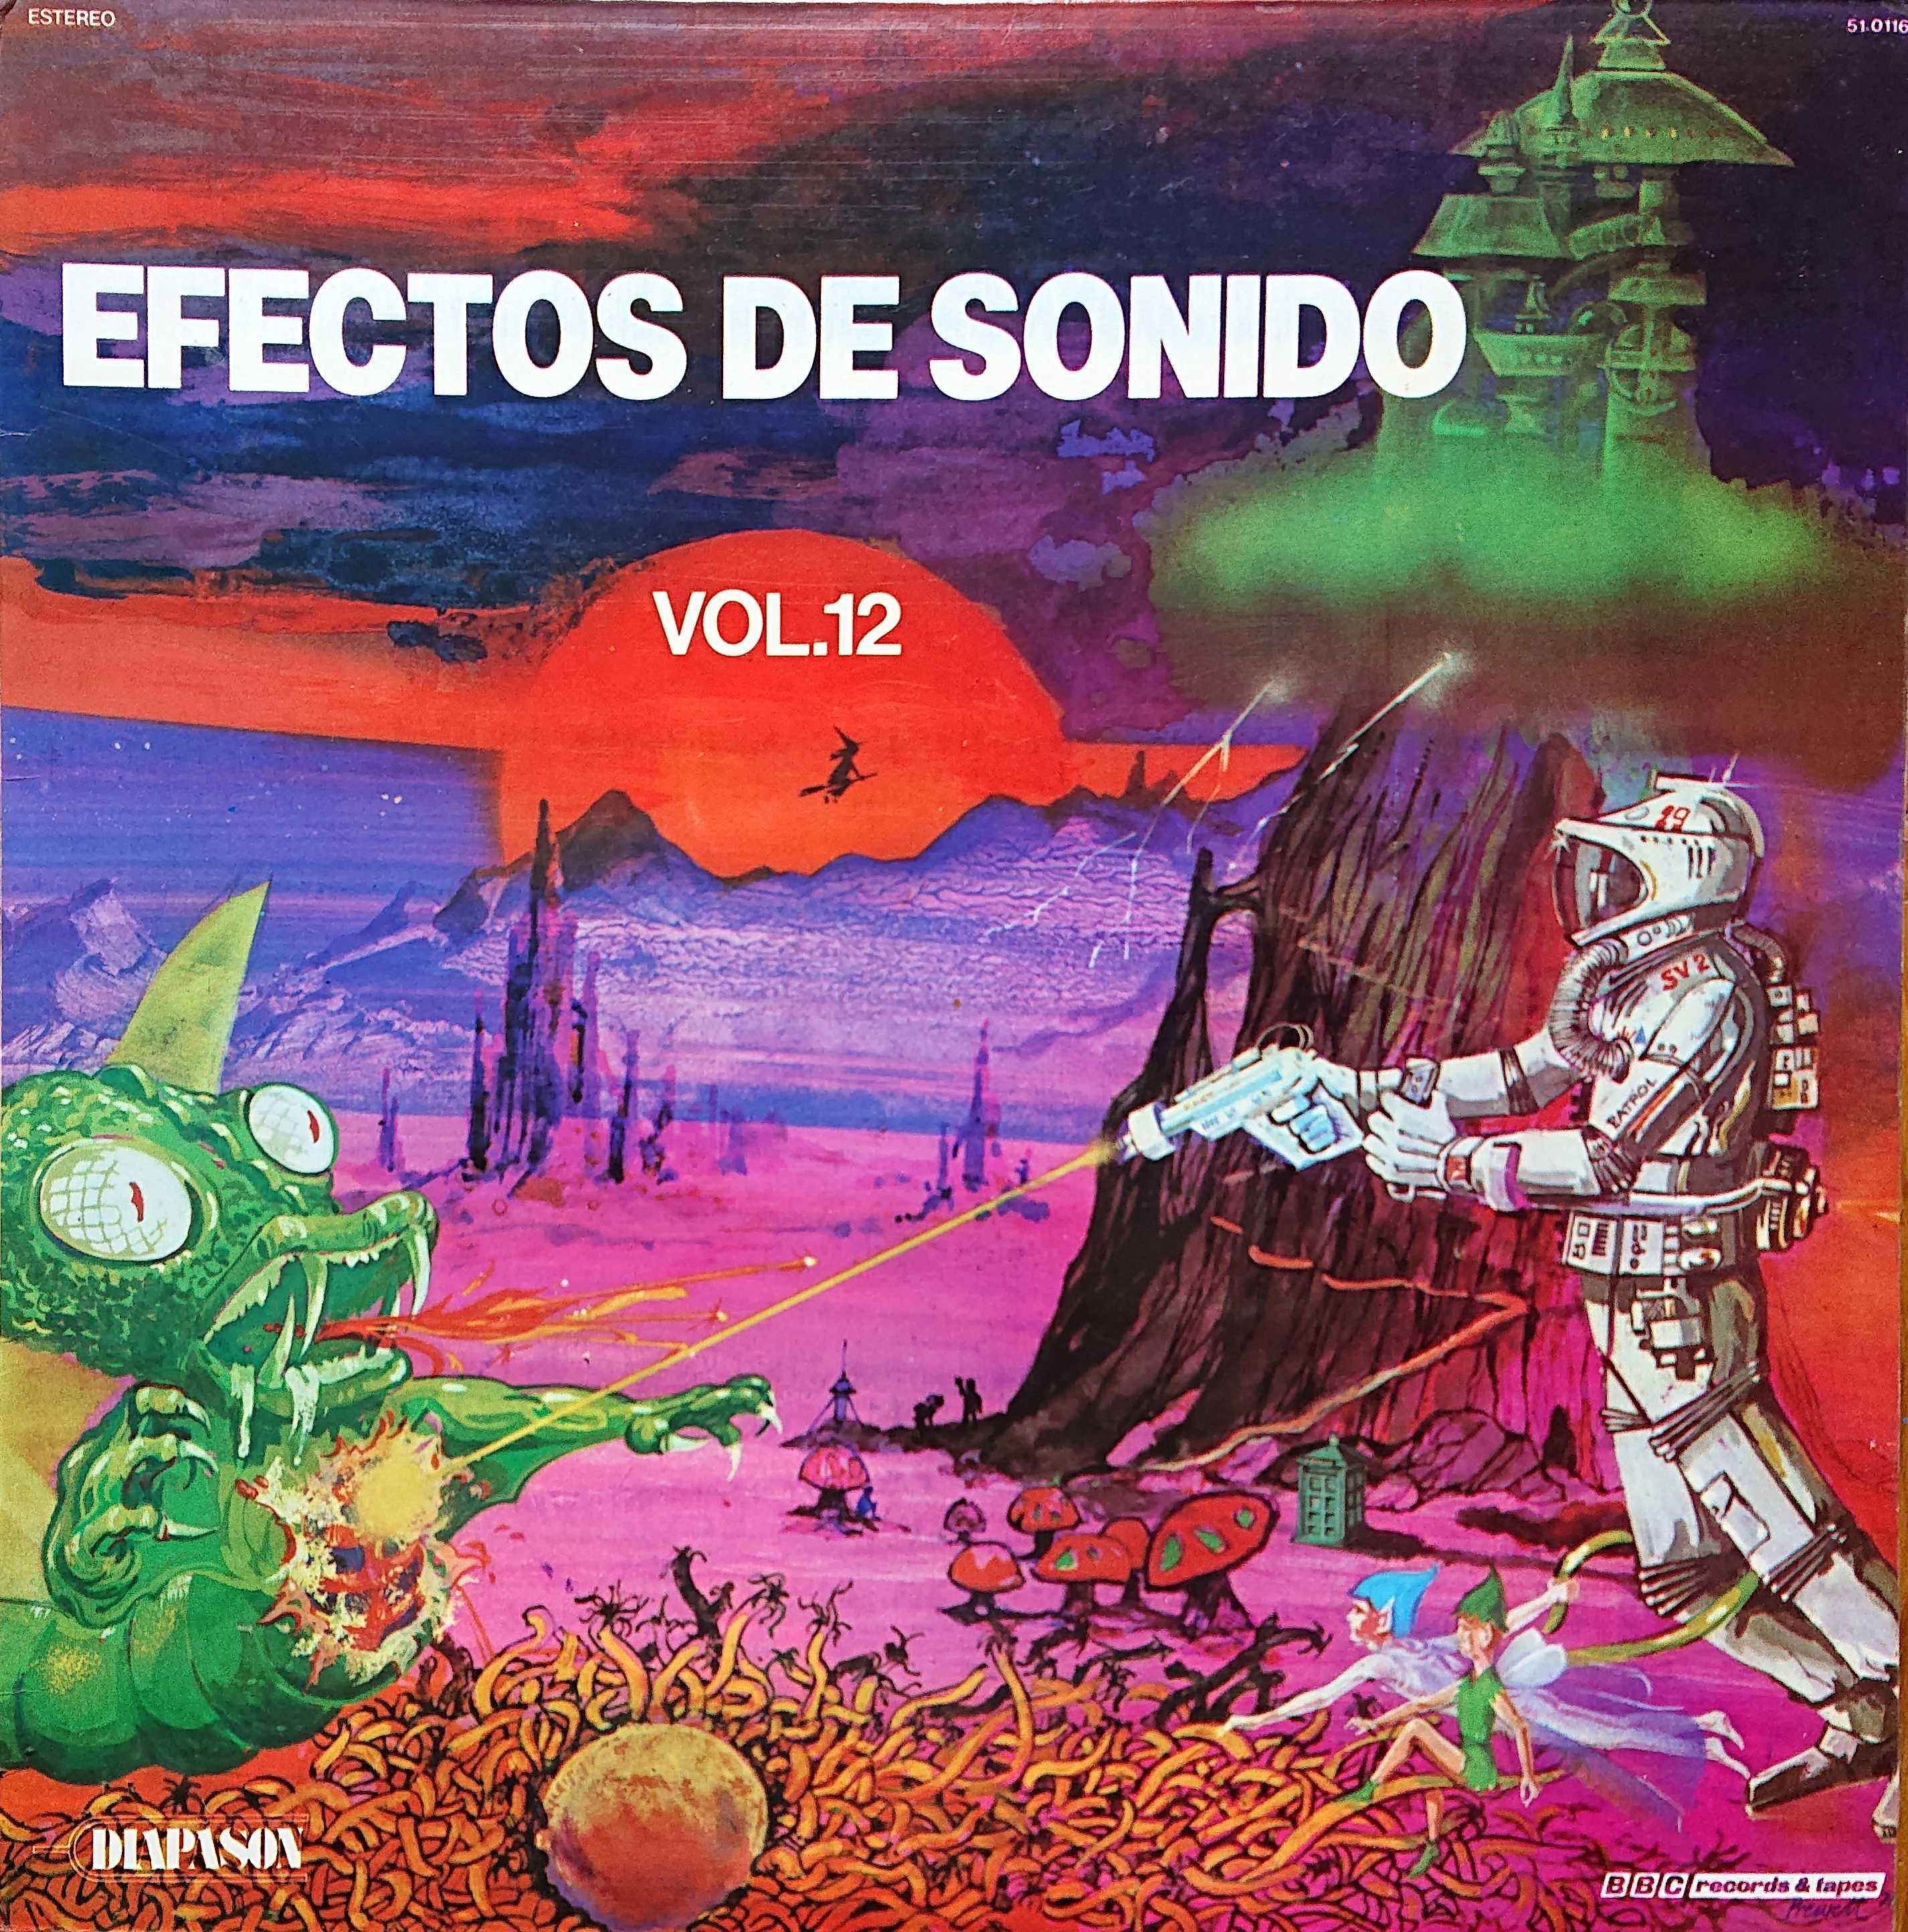 Picture of Efectos de sonido Vol 12 by artist Various / BBC Radiophonic Workshop from the BBC albums - Records and Tapes library